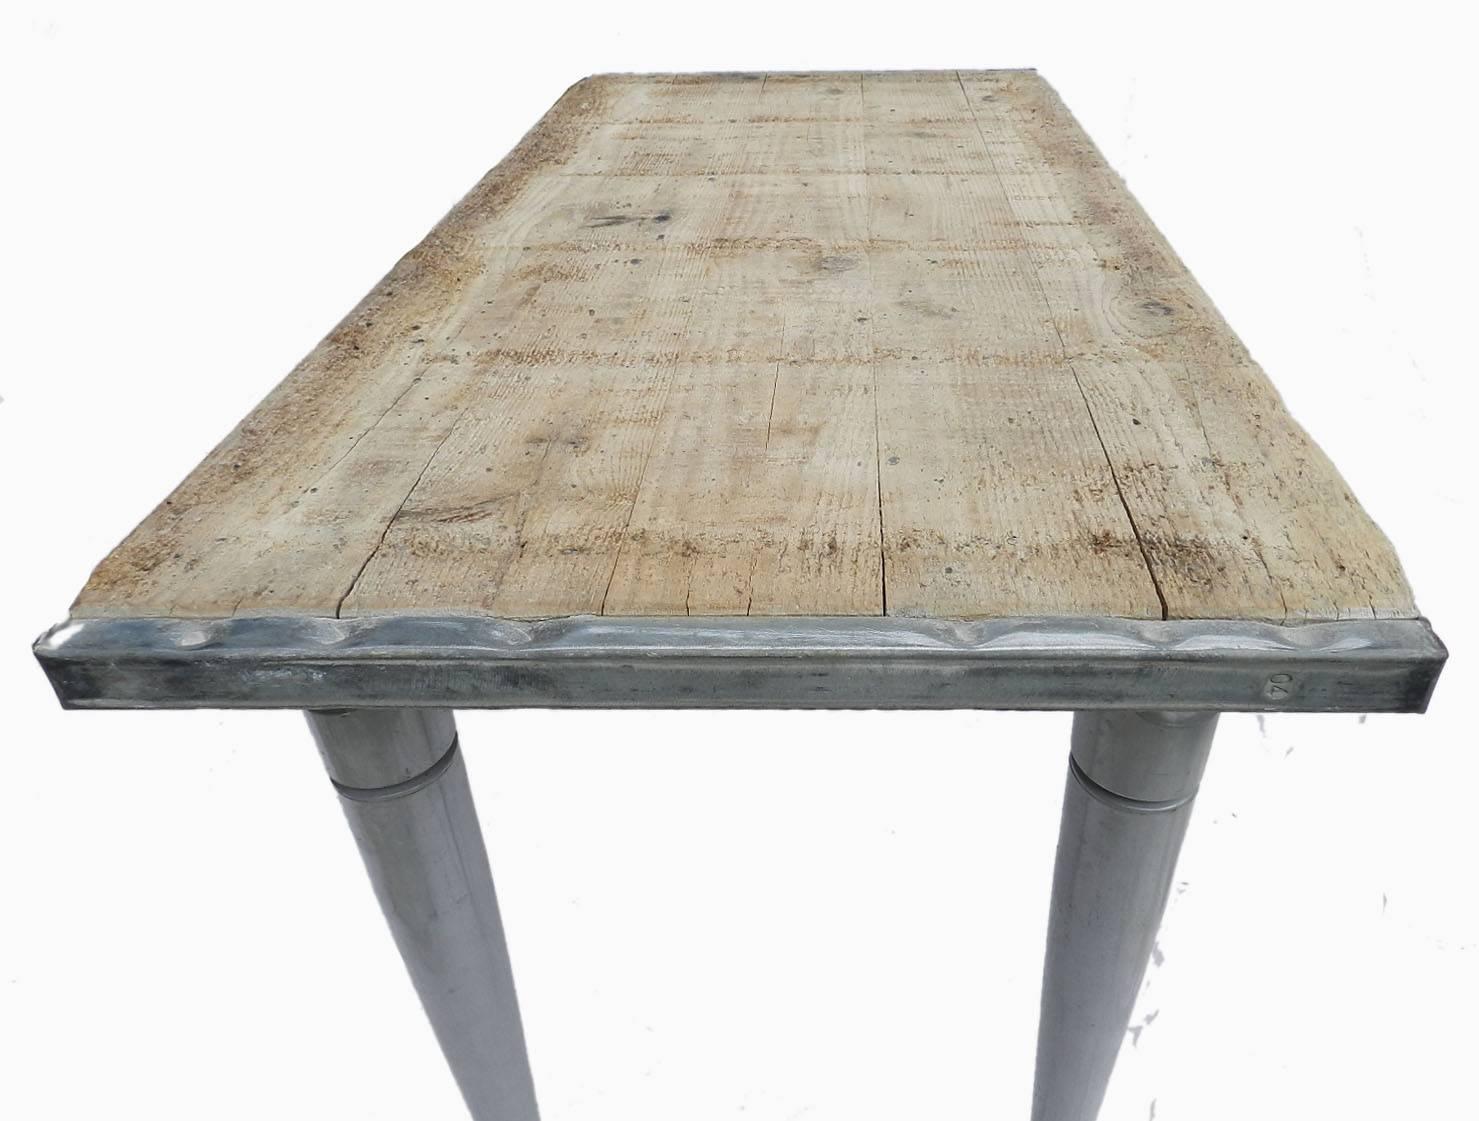 2 Unusual French Industrial side or pair console tables sold separately unless otherwise requested
Loft kitchen
Brute antique rough cut reclaimed wood tops indented with stones typical of the Pays Basque and Spanish agricultural wood
Zinc clad